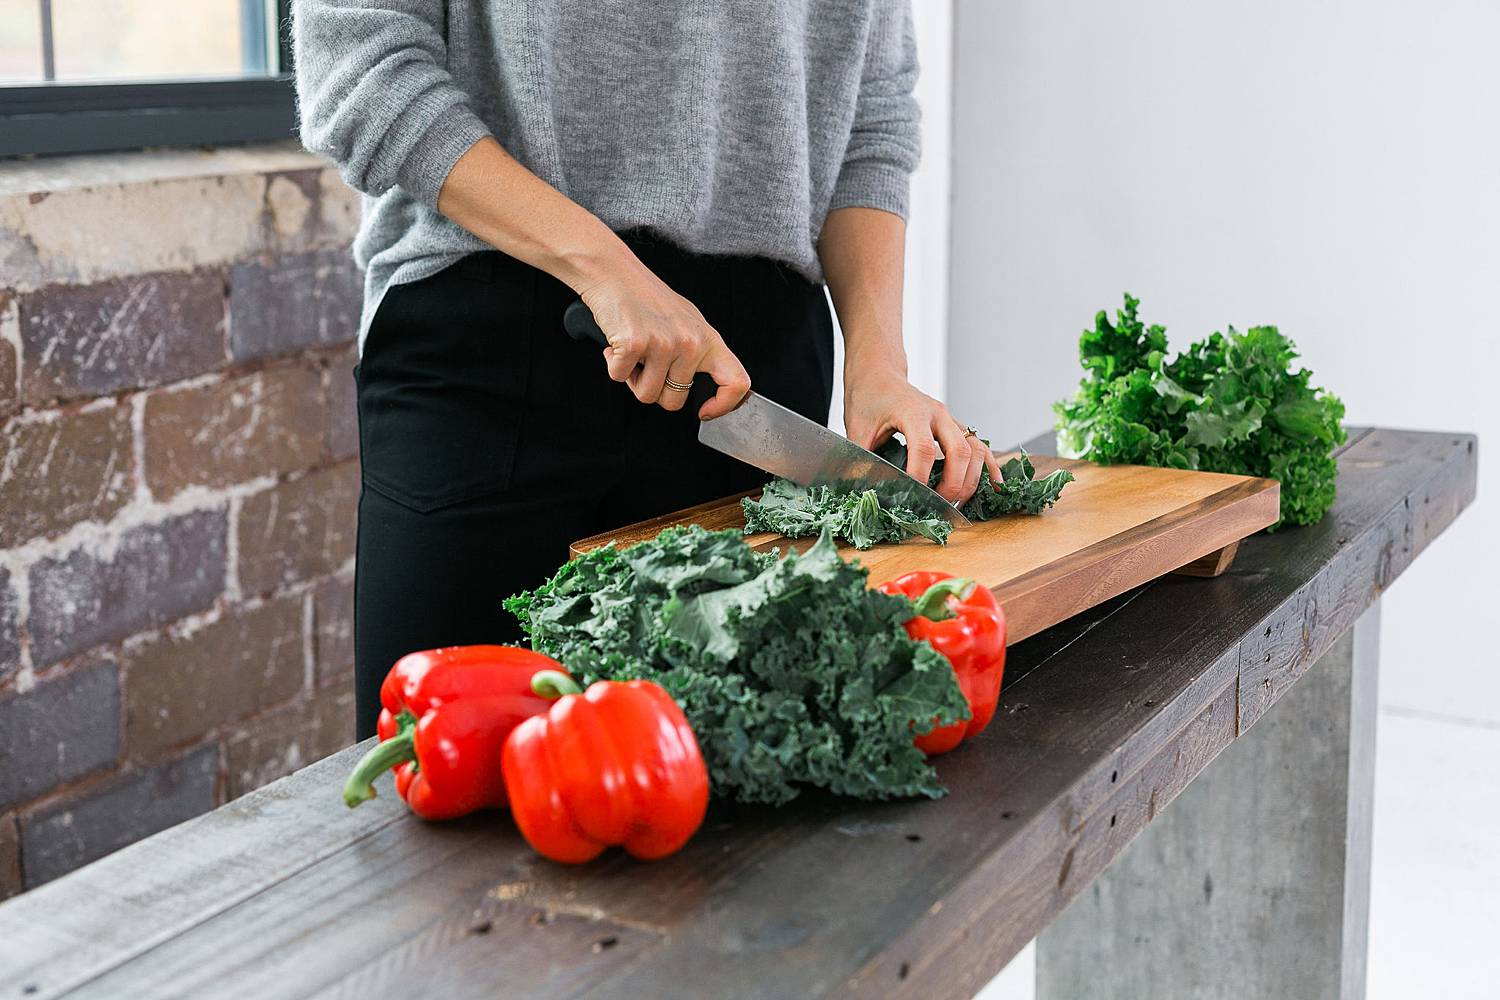 woman chopping produce kale and peppers